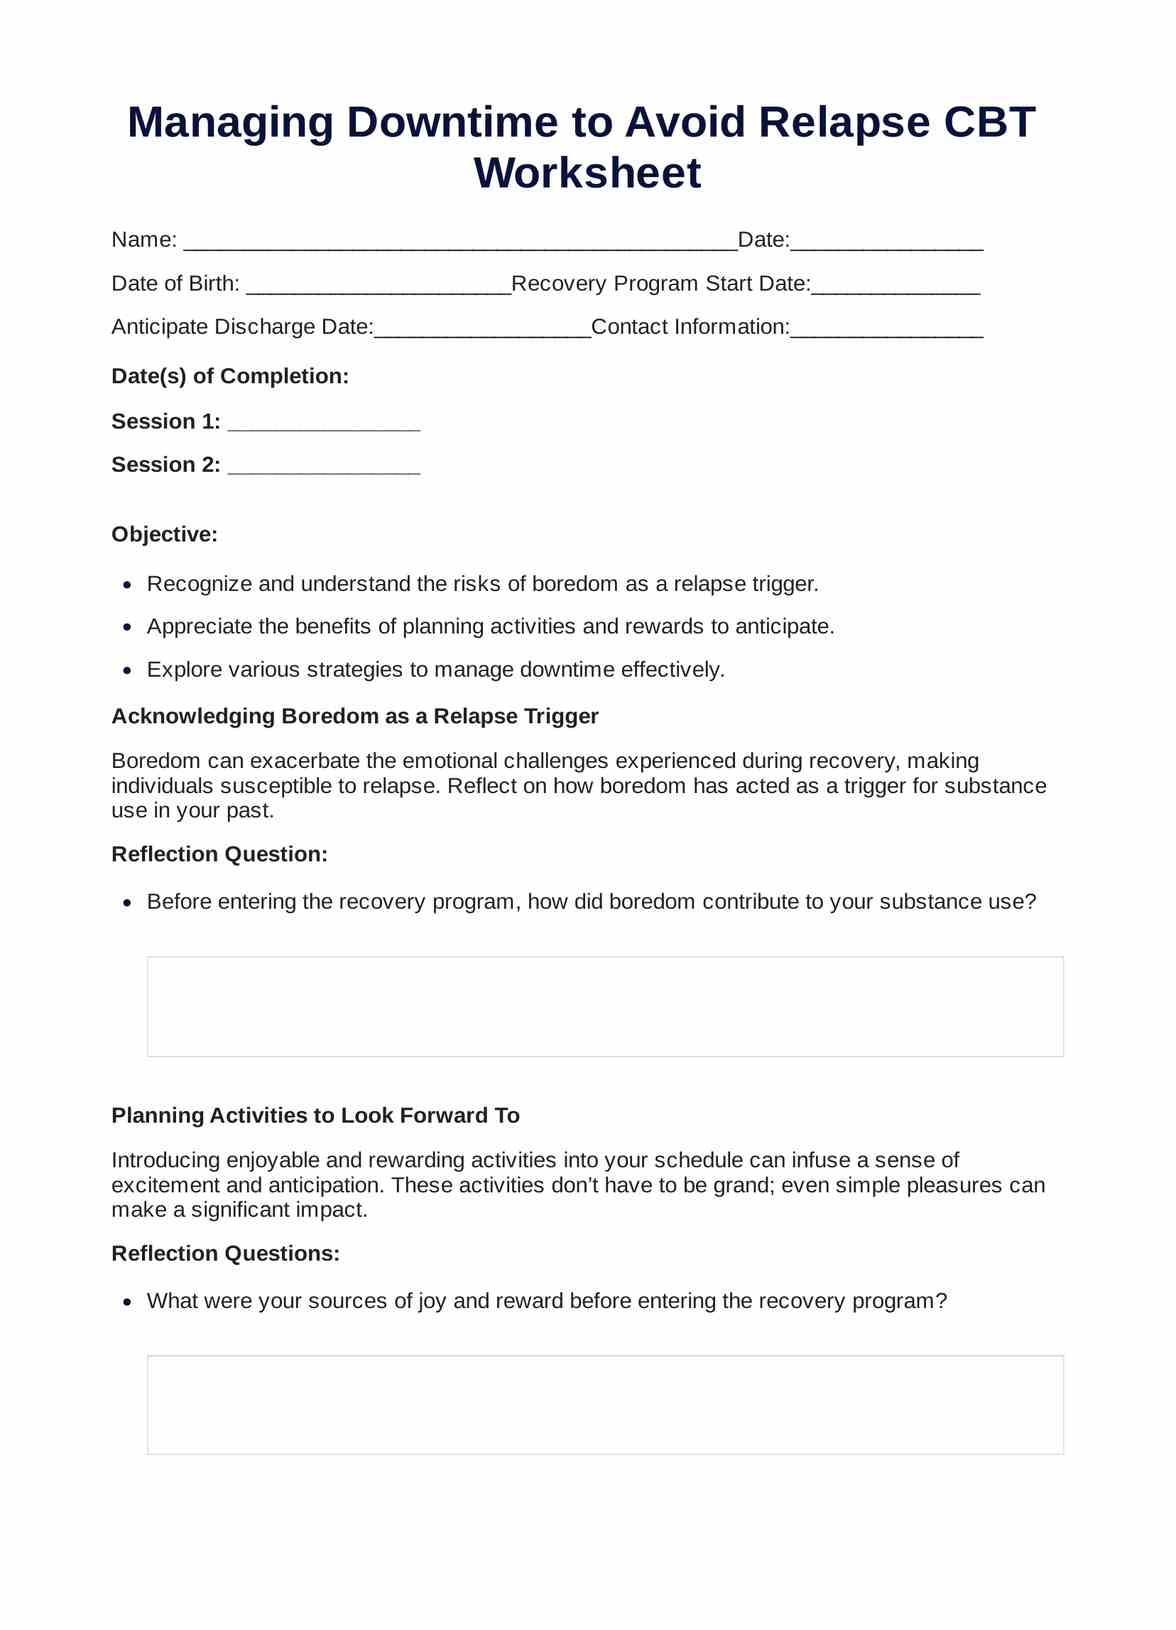 Managing Downtime to Avoid Relapse CBT Worksheet PDF Example